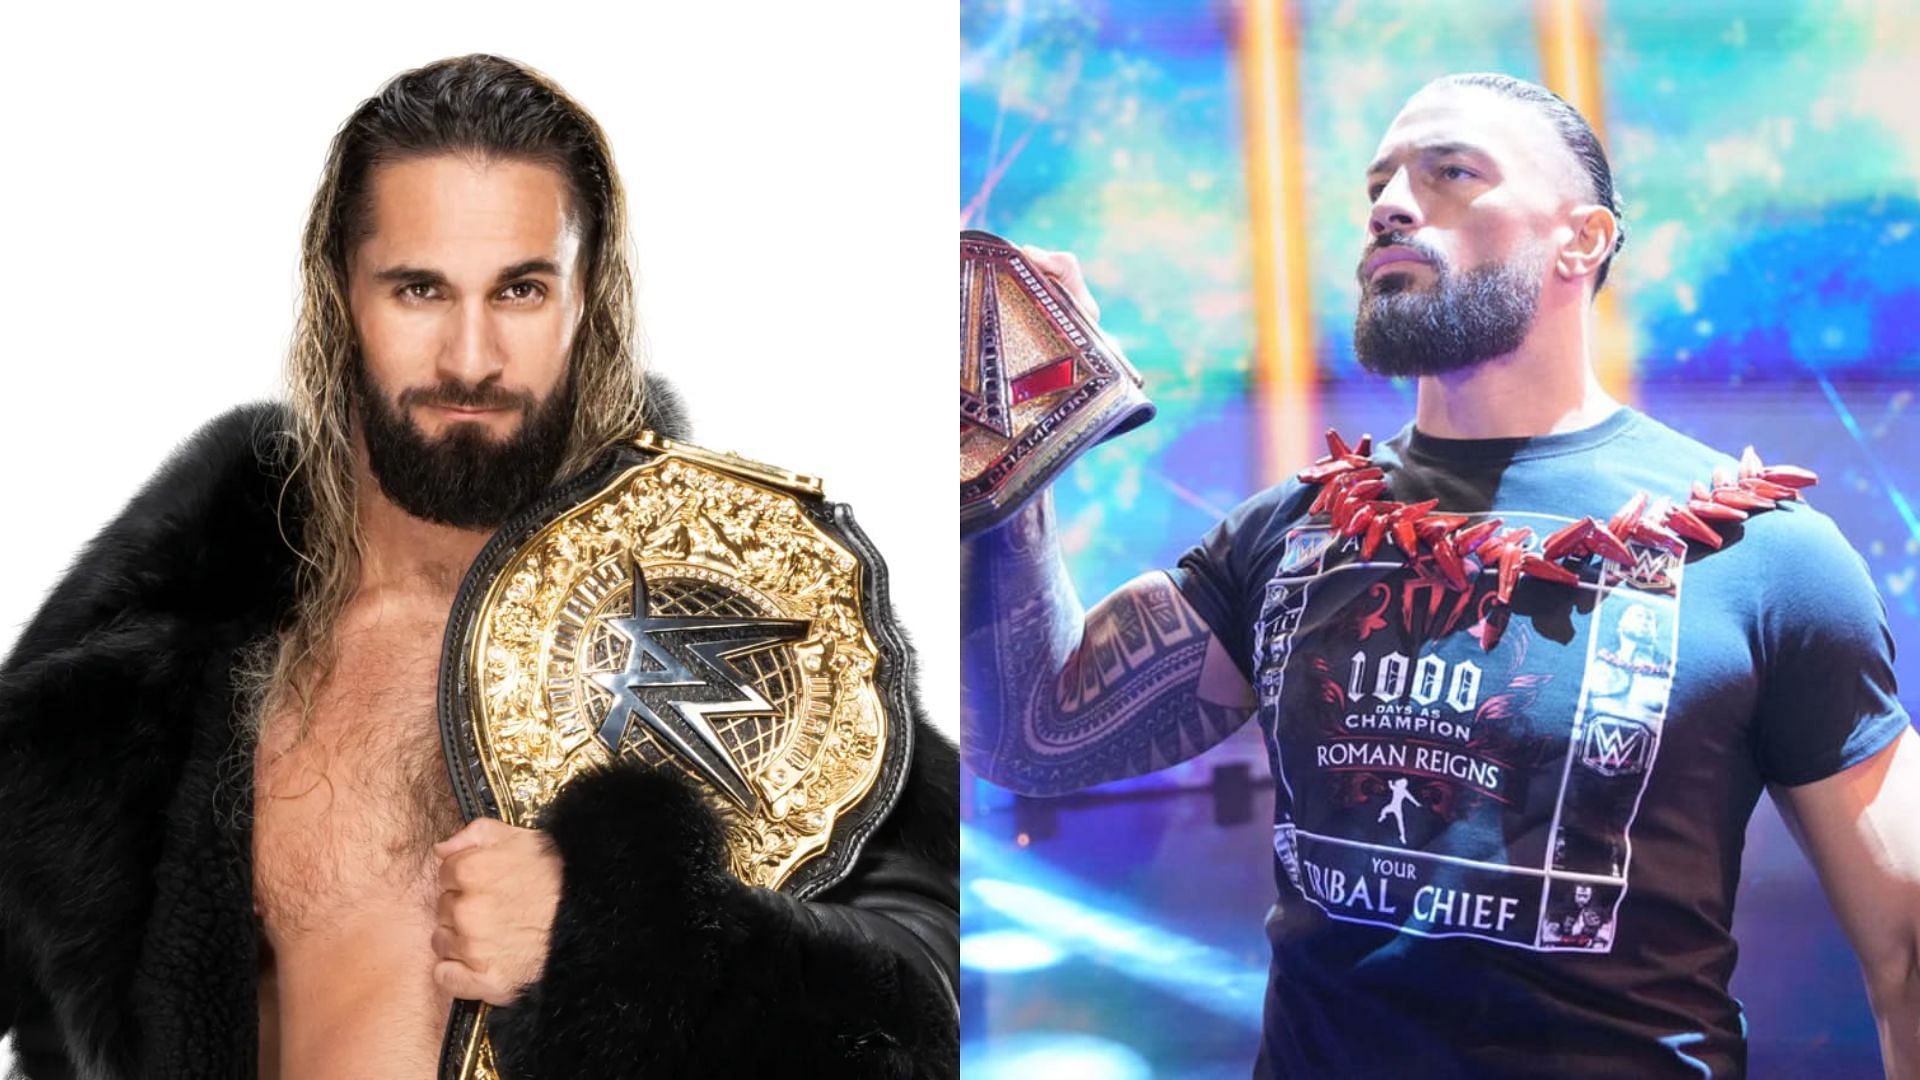 The veterans were in agreement about their pick between Seth Rollins and Roman Reigns